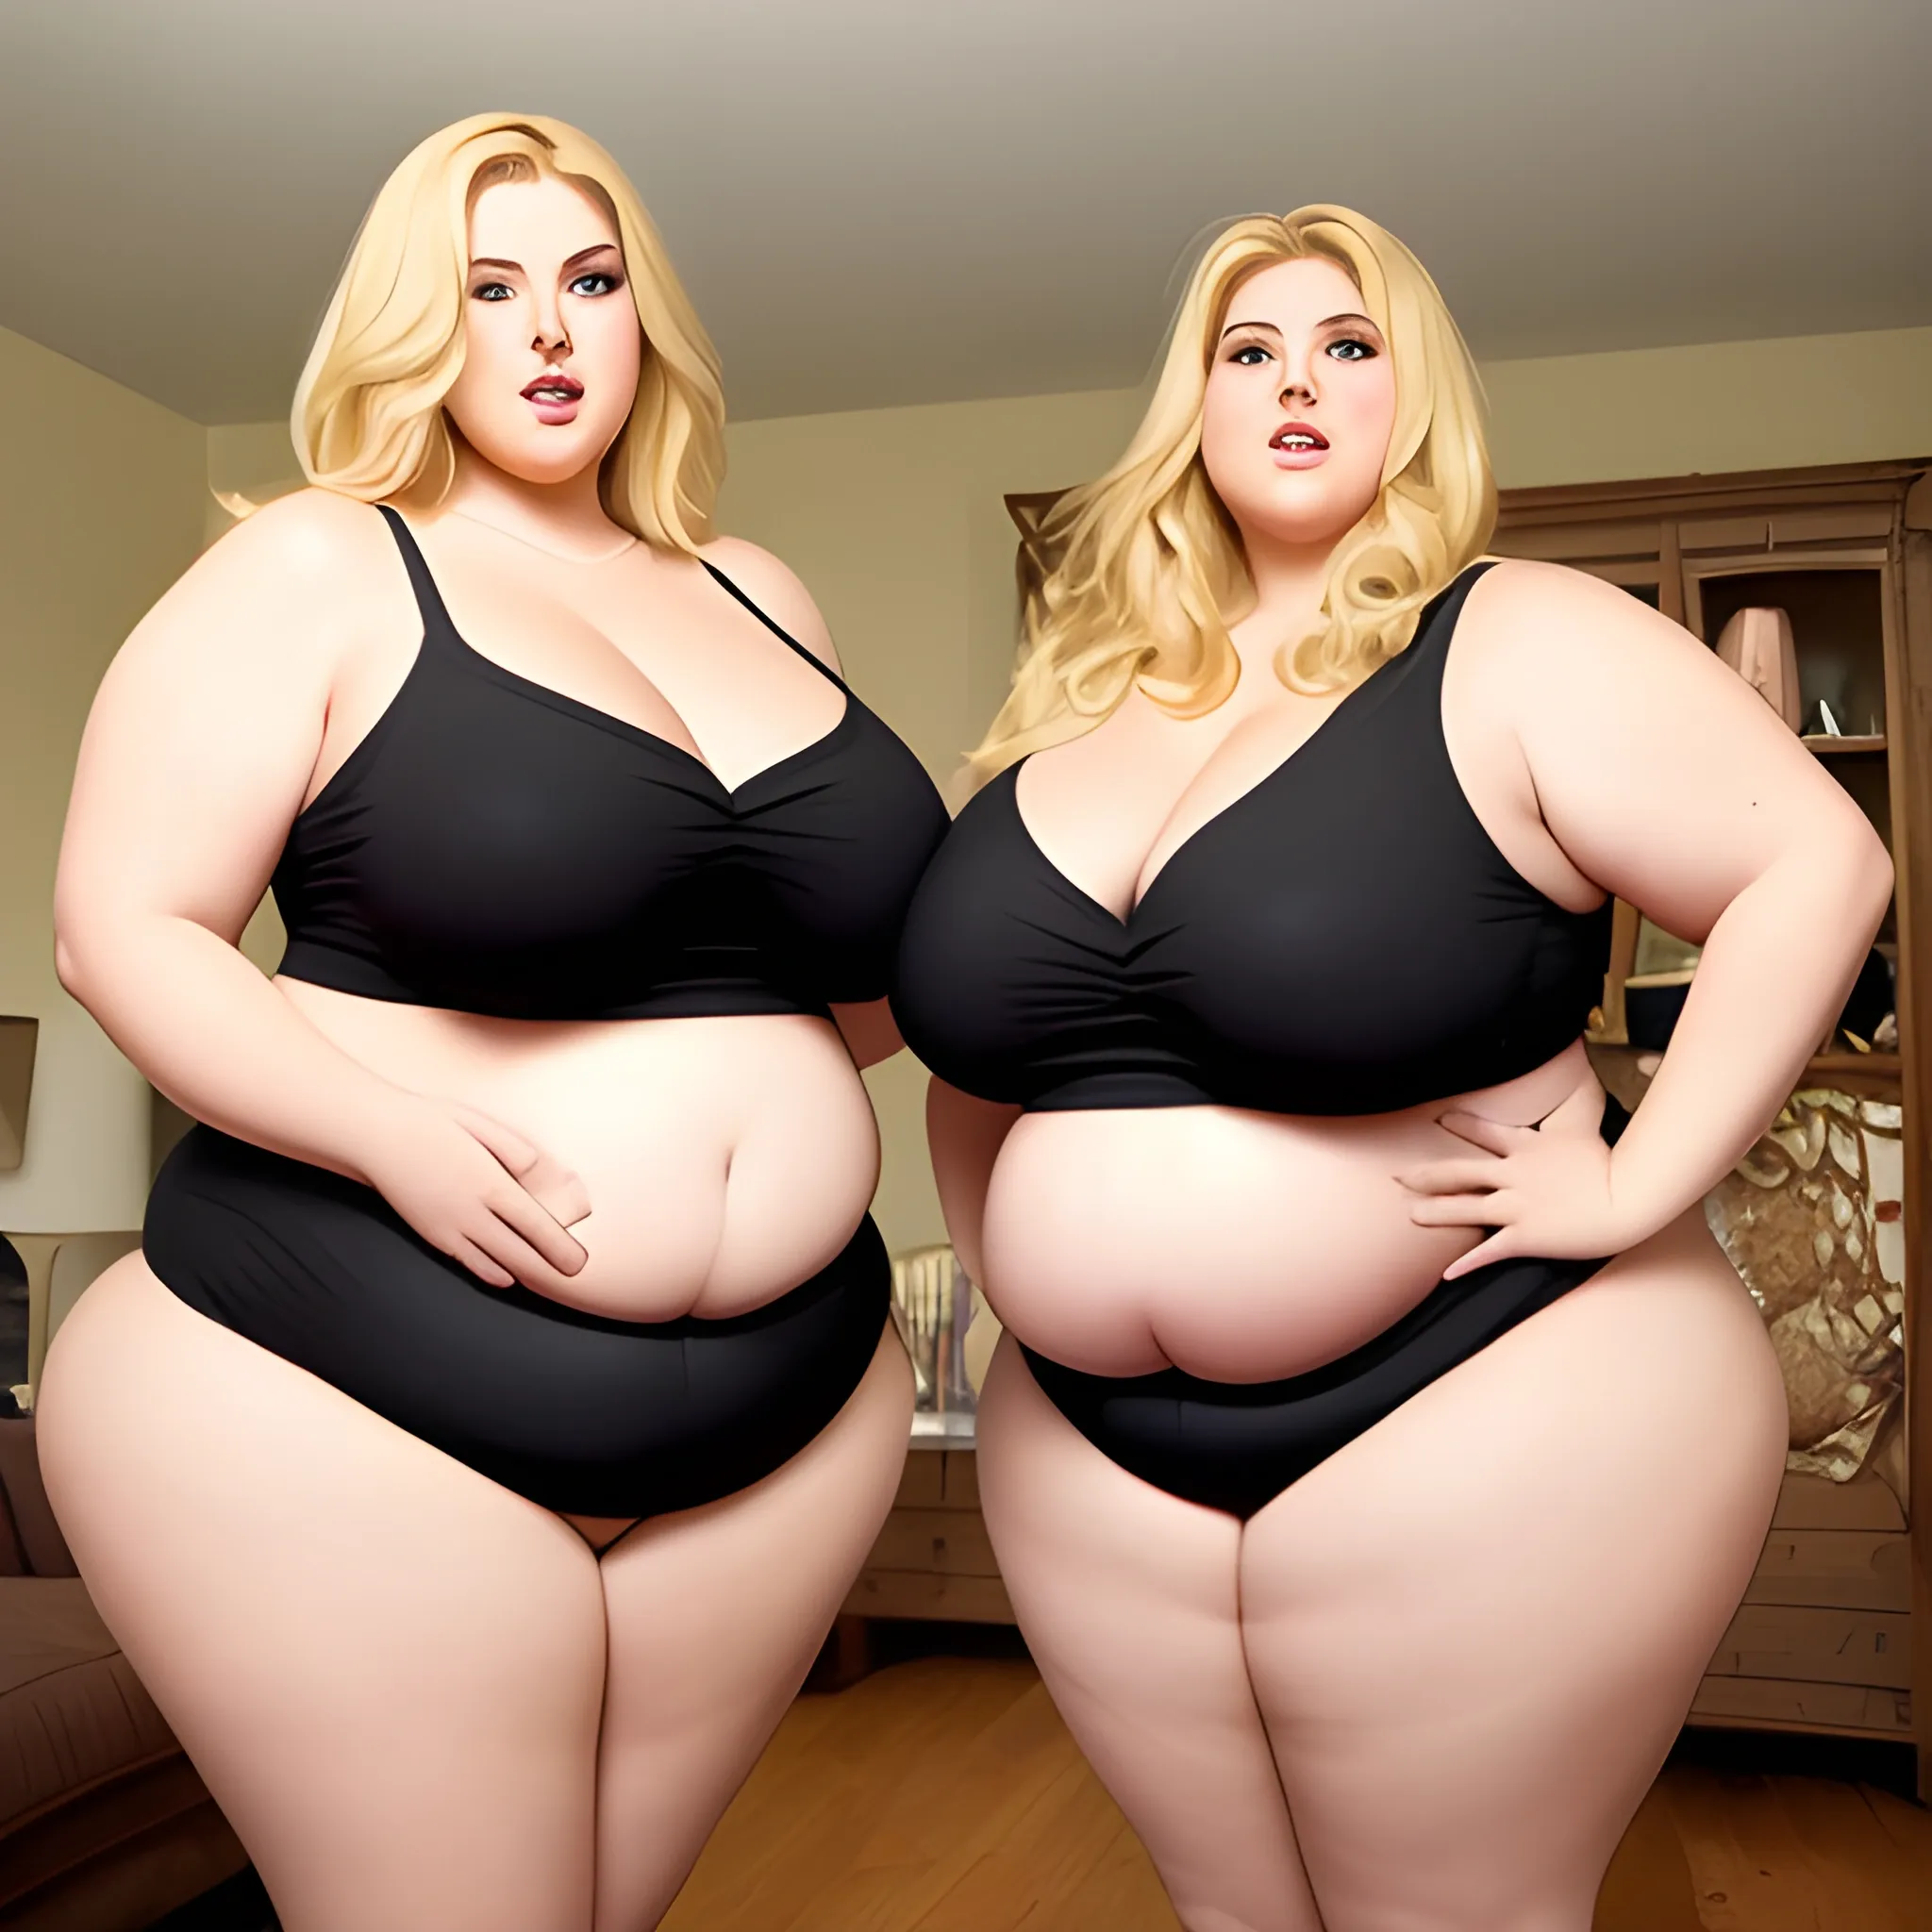 large and tall, very voluptuous, full-figured blonde woman who h 